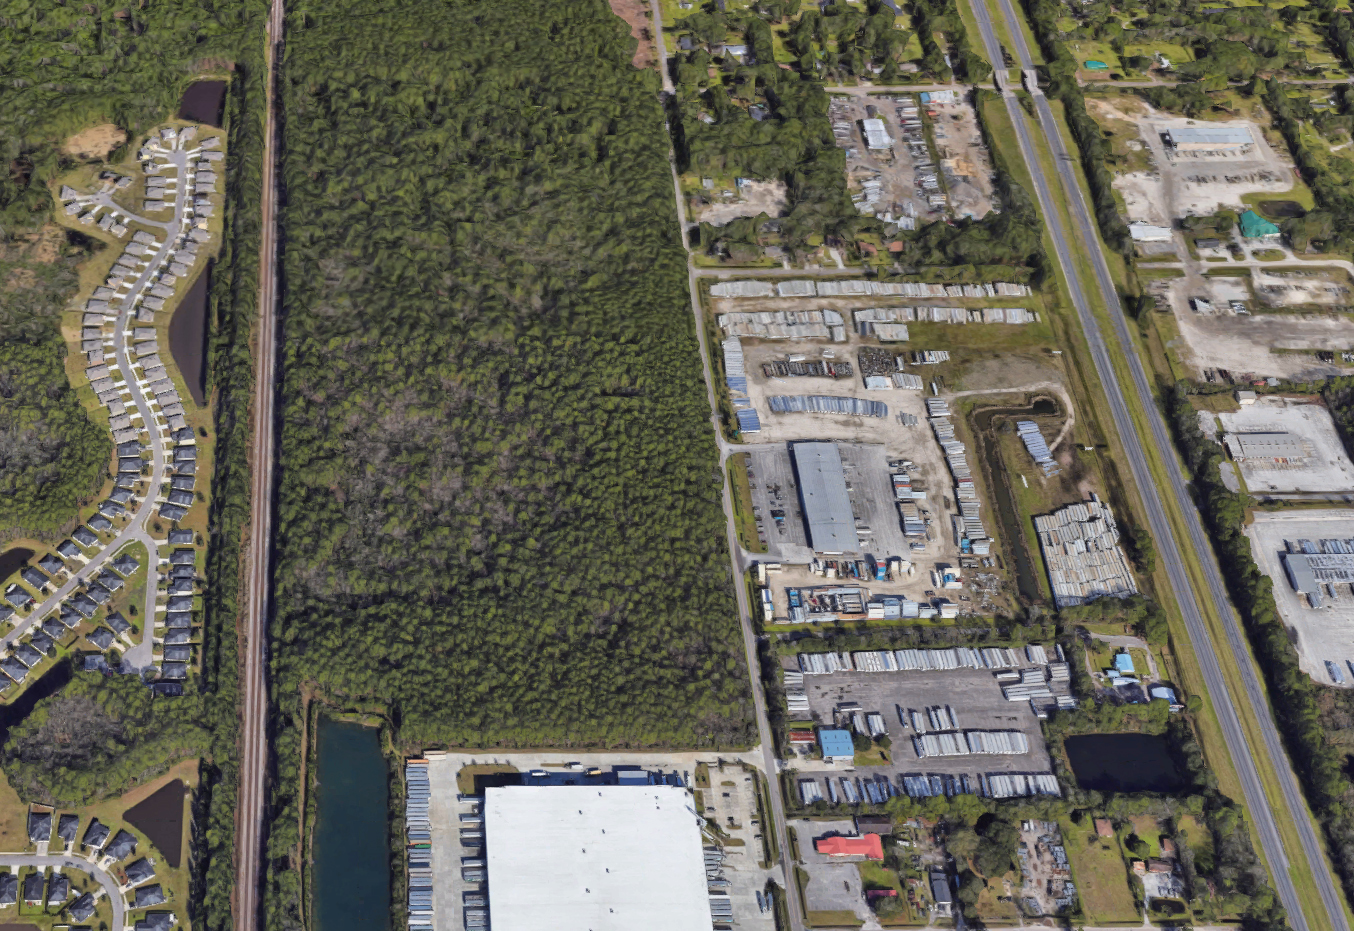 Warehouse Rentals will build the structures on 16 acres at 2730 Pickettville Road. (Google)